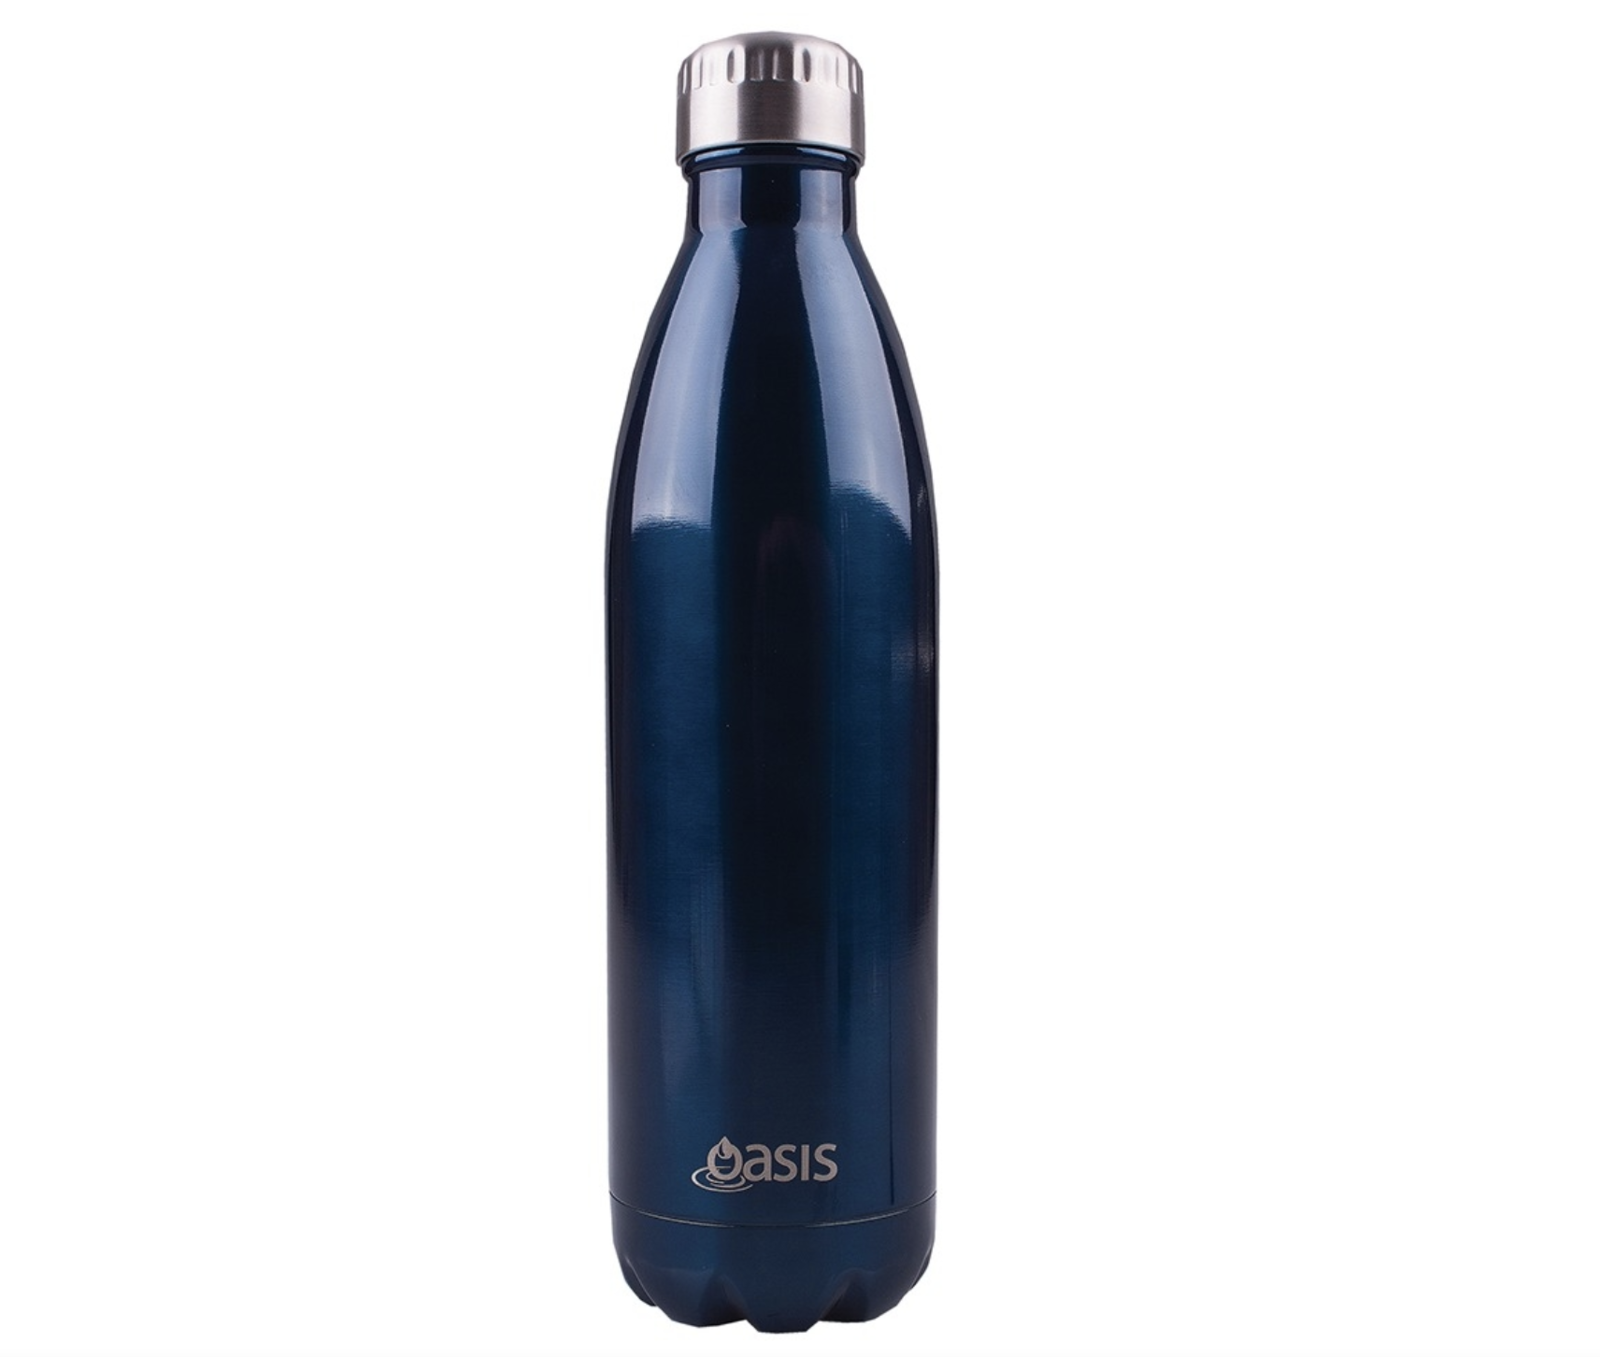 Oasis 750ml Stainless Steel Double Wall Insulated Drink Bottle Navy